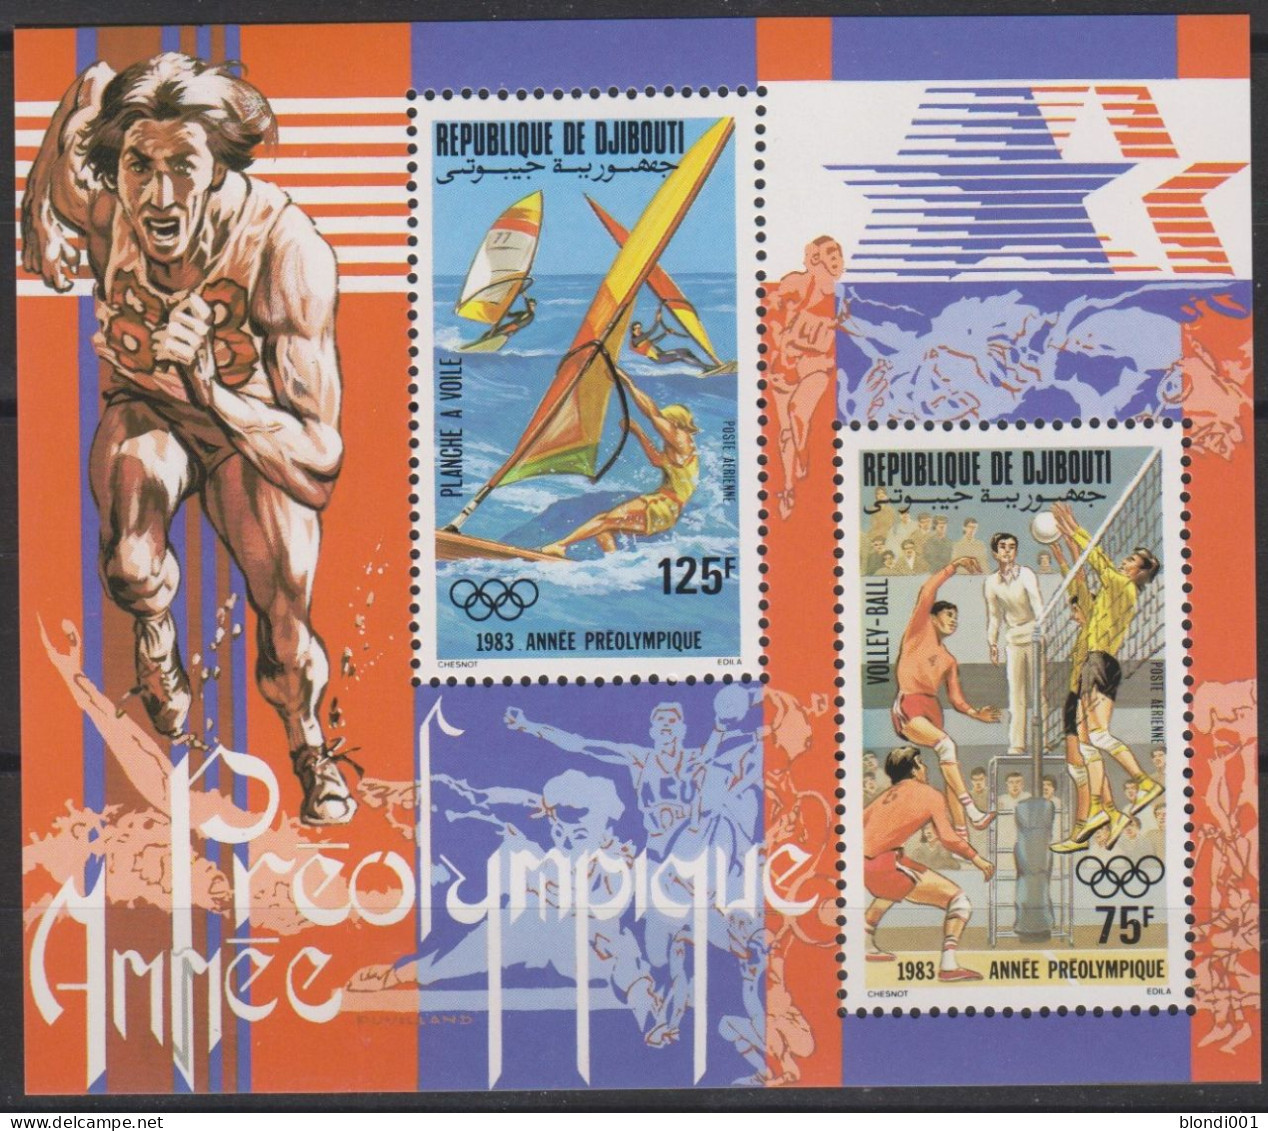 Olympics 1984 - Volleyball - DJIBOUTI - S/S Perf. De Luxe MNH - Ete 1984: Los Angeles